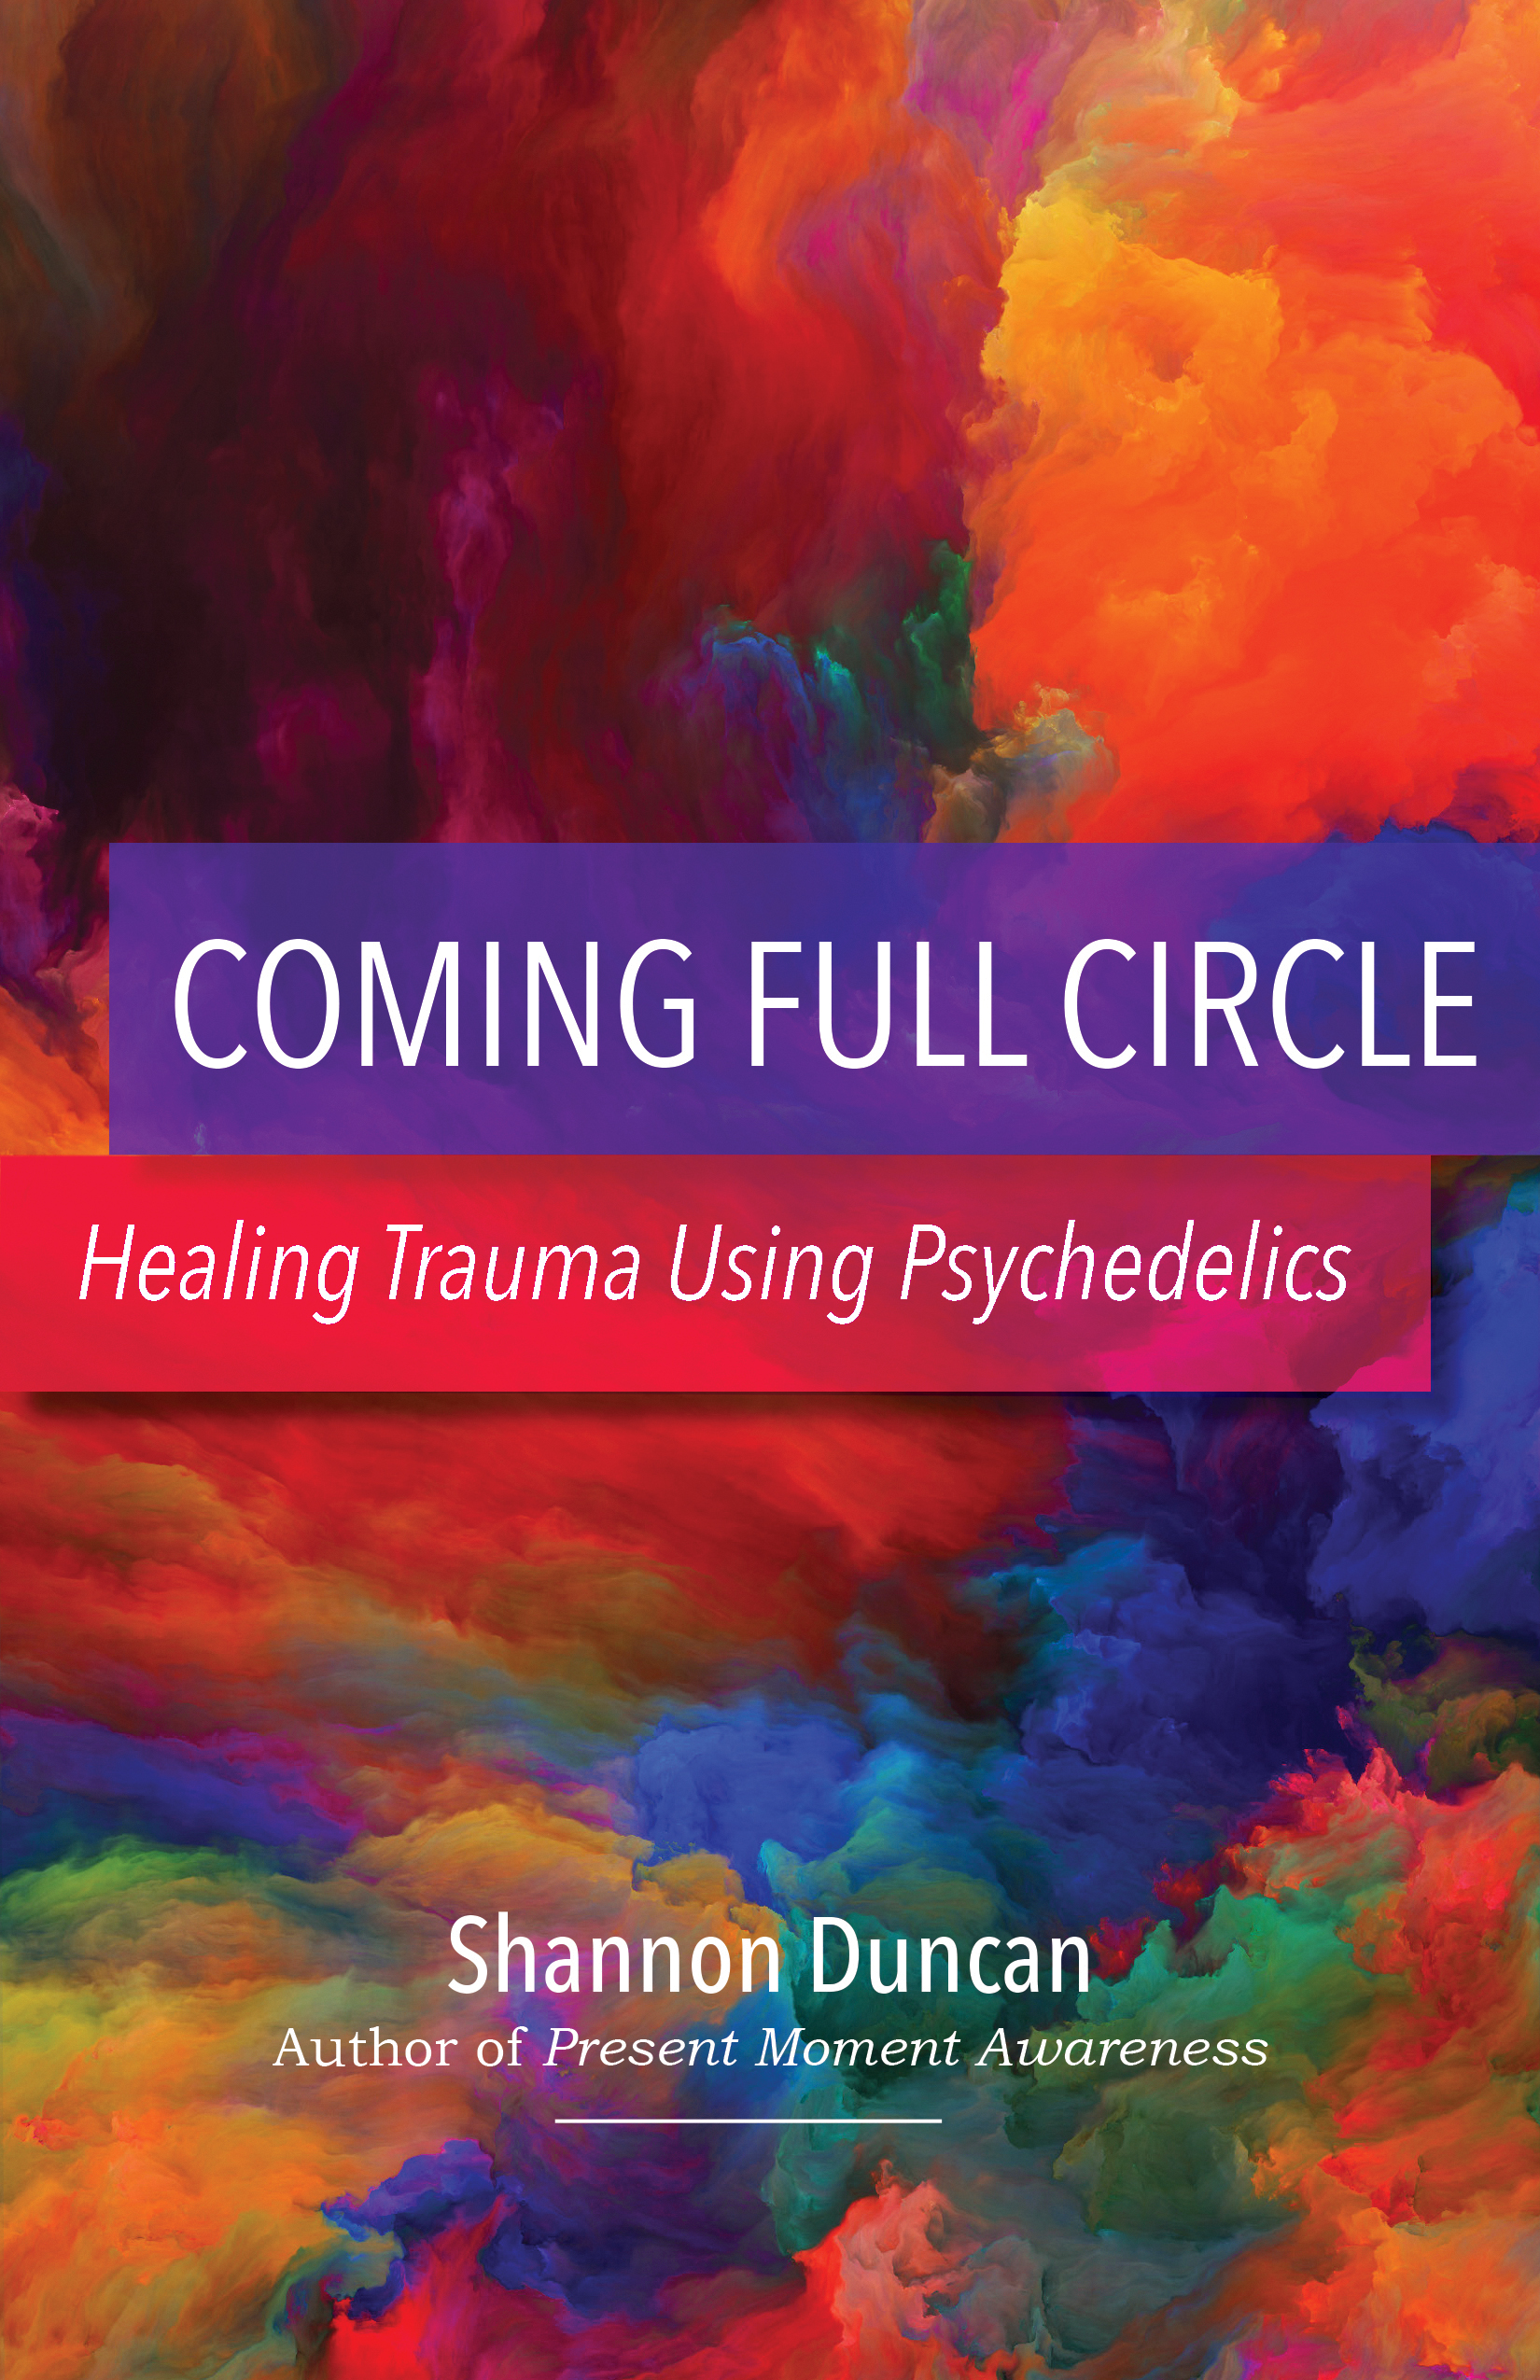 Coming Full Circle by Shannon Duncan